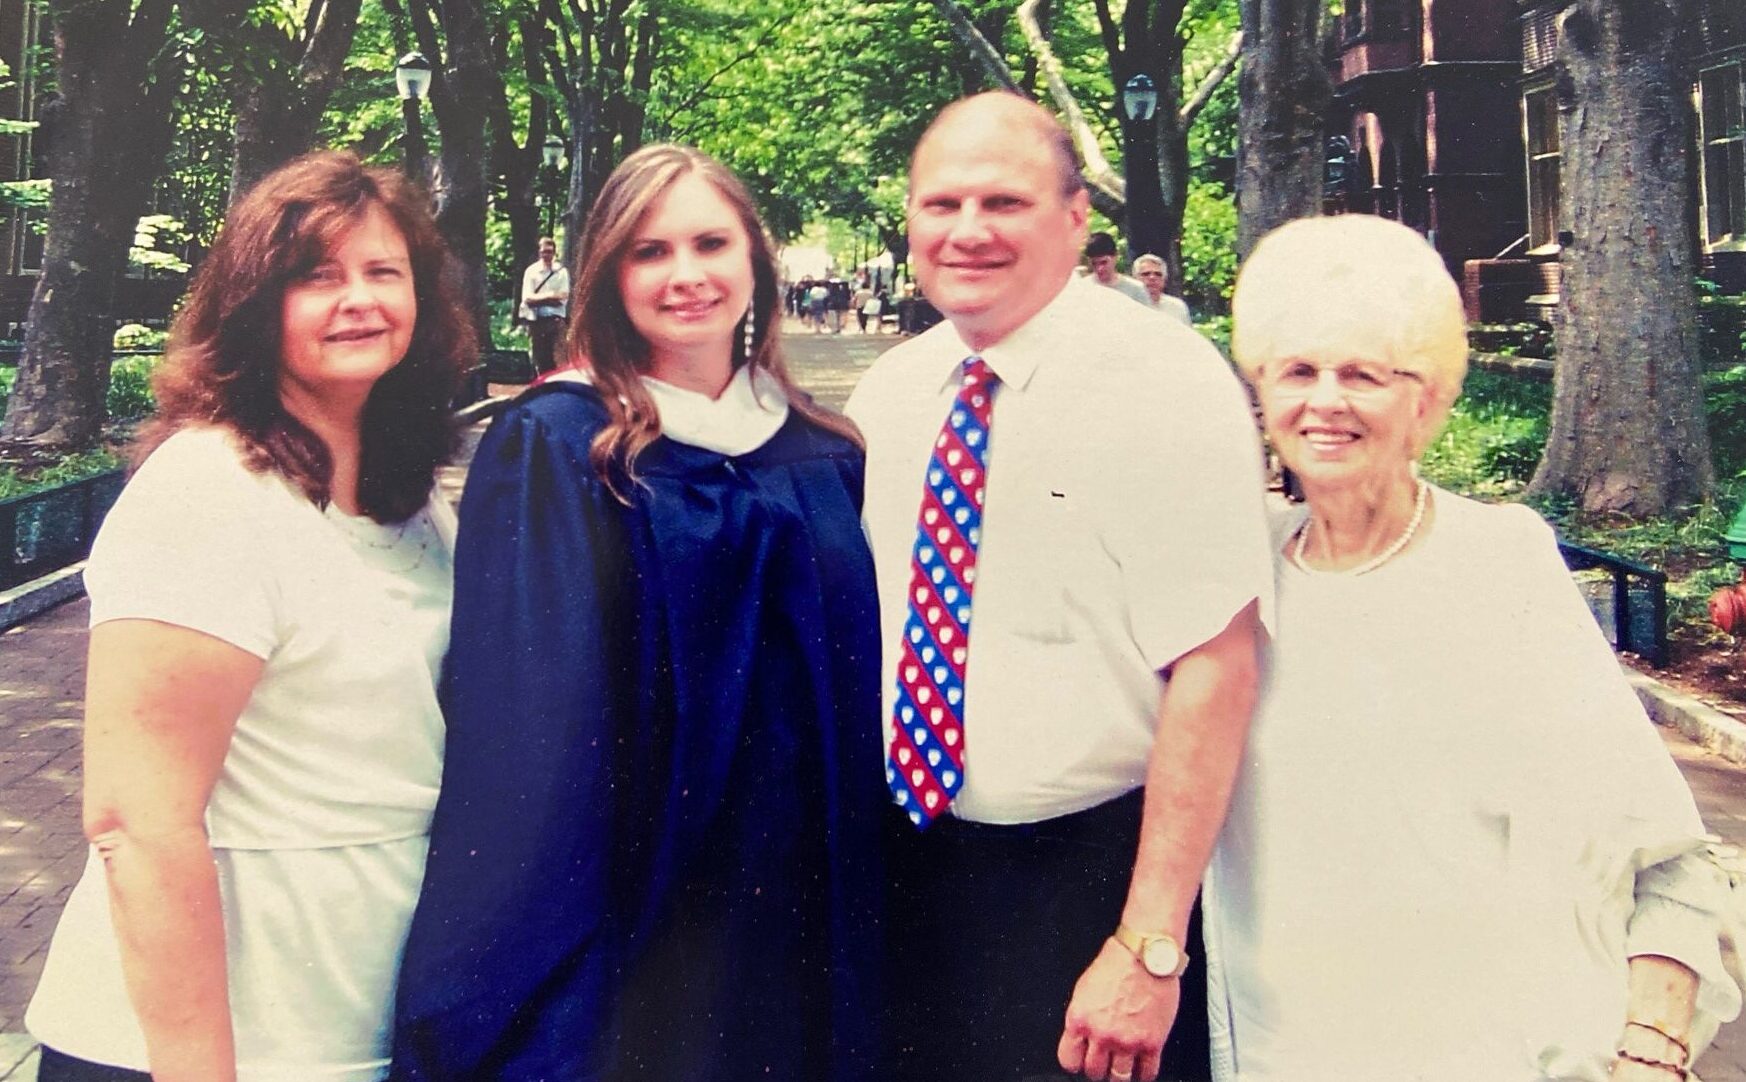 Photo of four people with one person in graduation gown.